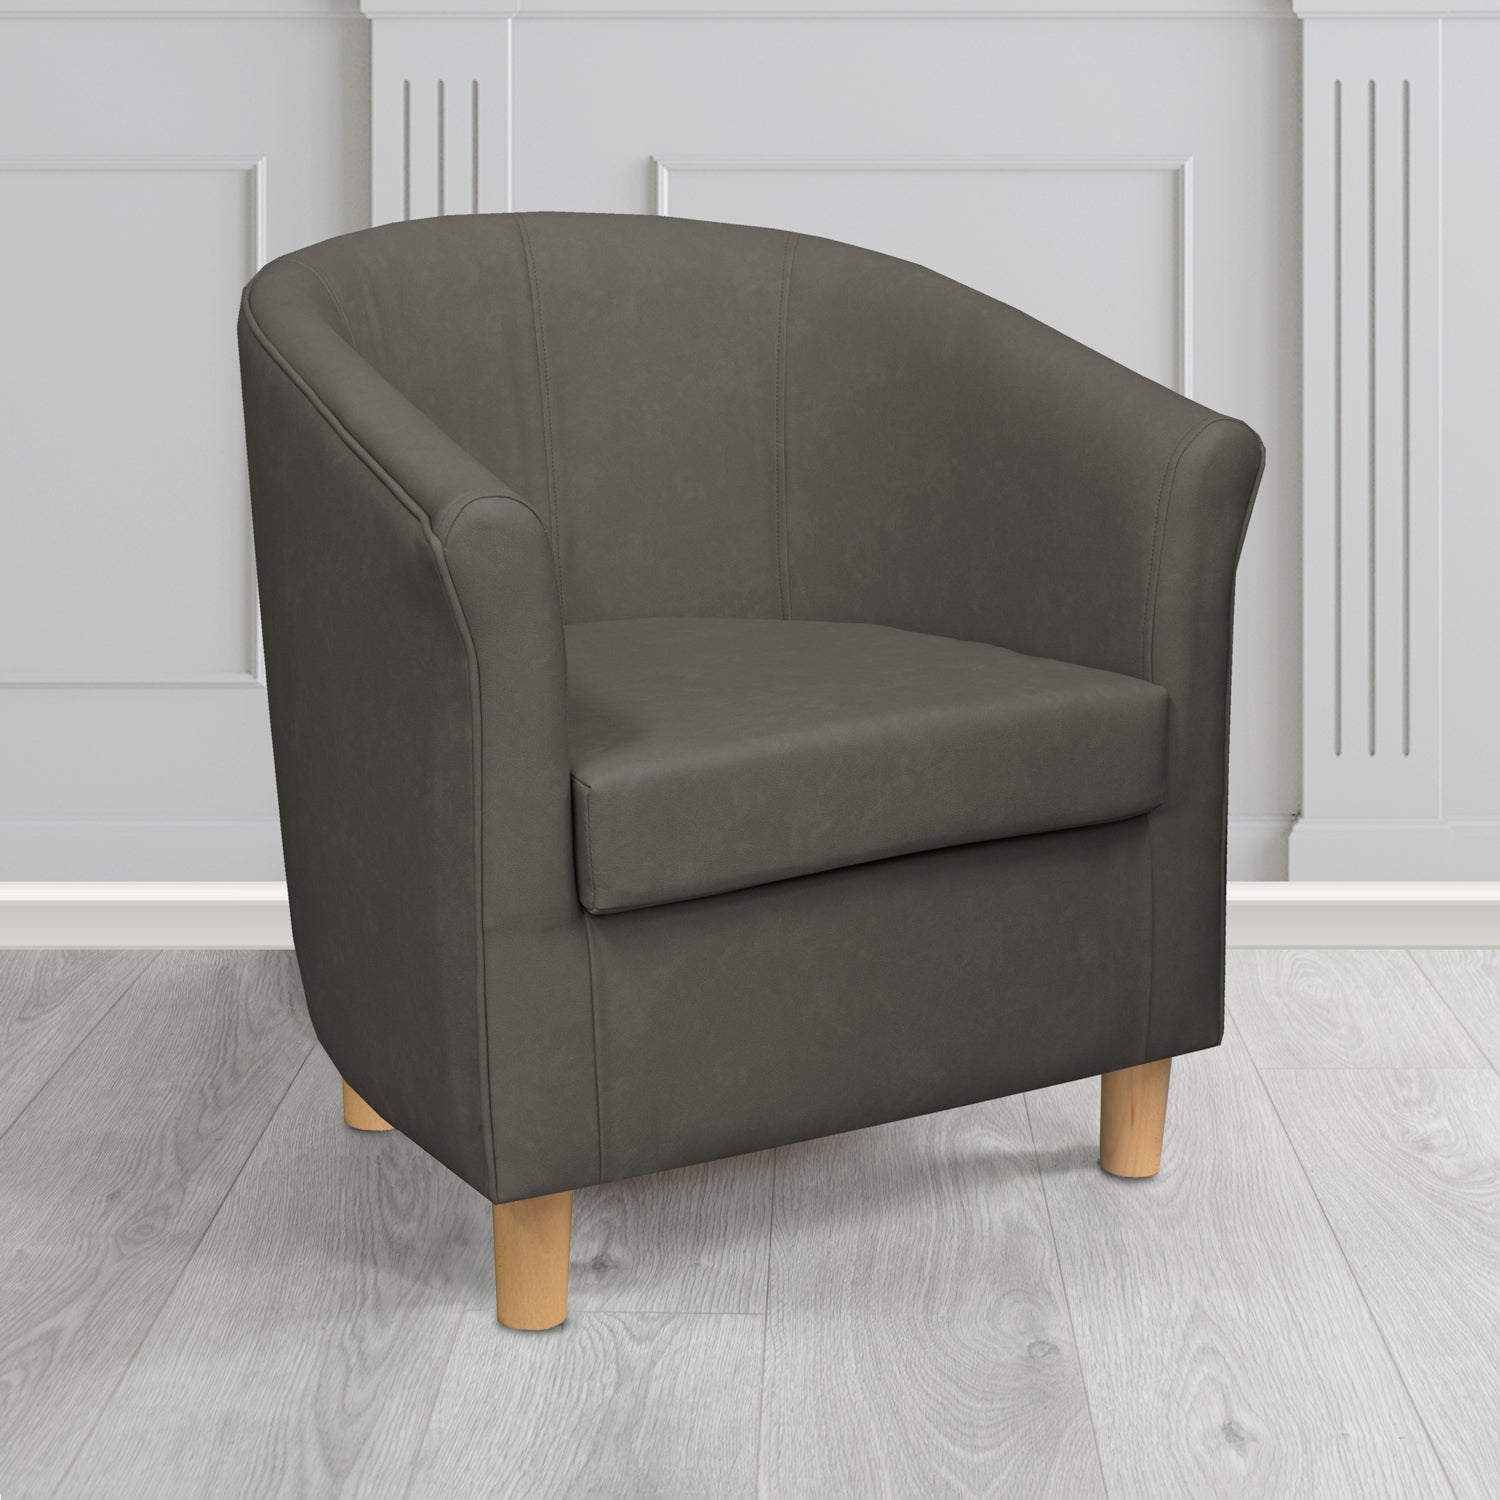 Tuscany Tub Chair in Infiniti Charcoal INF1861 Antimicrobial Crib 5 Faux Leather - The Tub Chair Shop